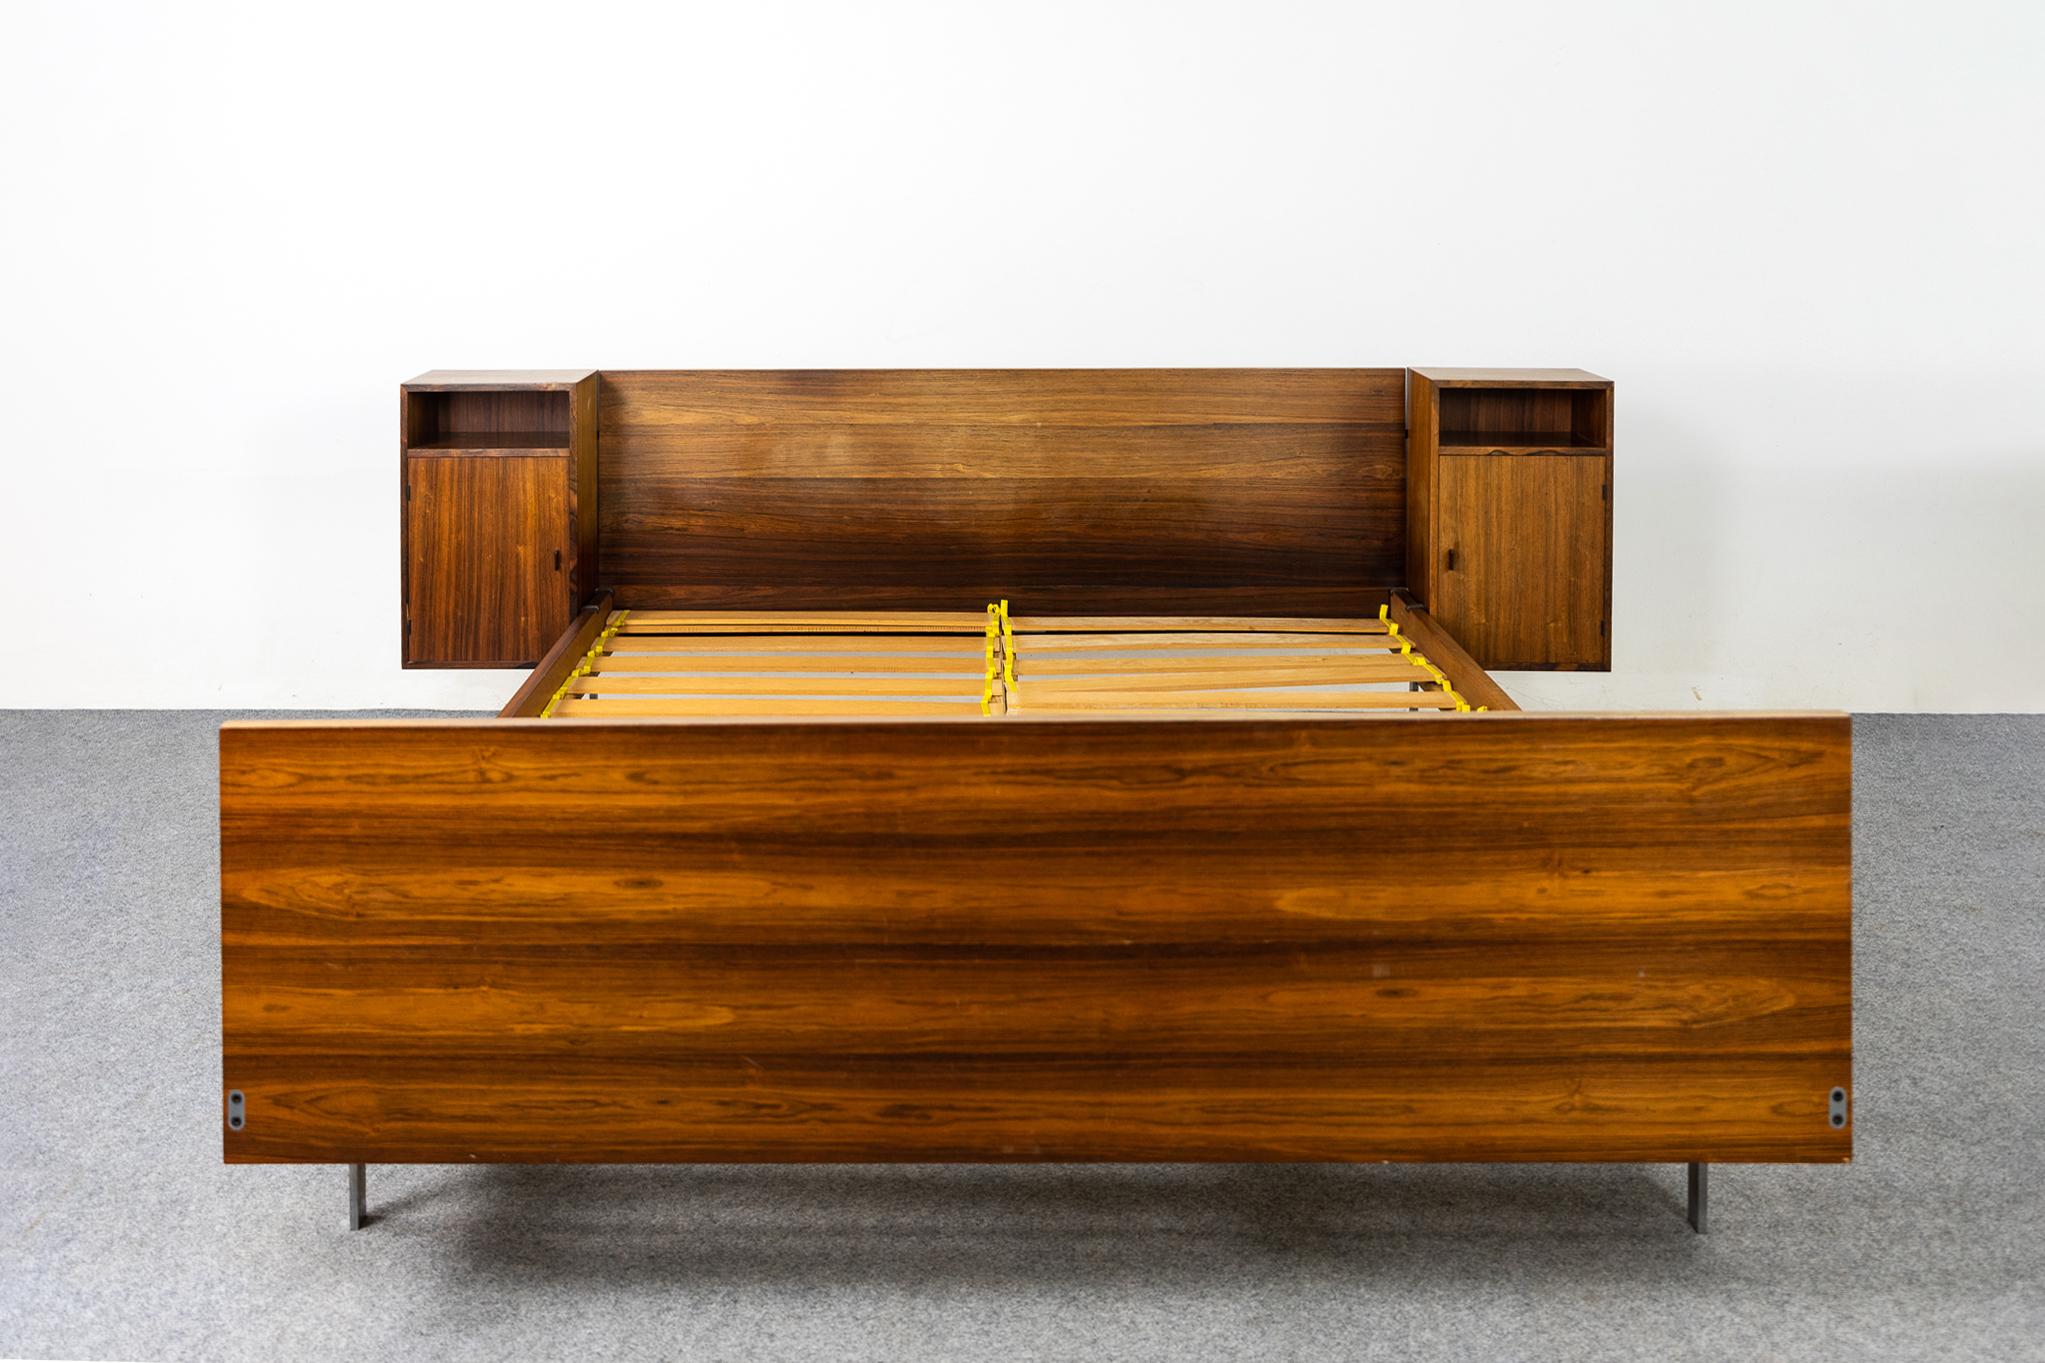 Rosewood *European queen size bed frame, circa 1960's. Impressive headboard with expertly book-matched veneer, floating night tables and chrome legs. Original hardwood slats, center support beam provides extra stability and comfort underneath your